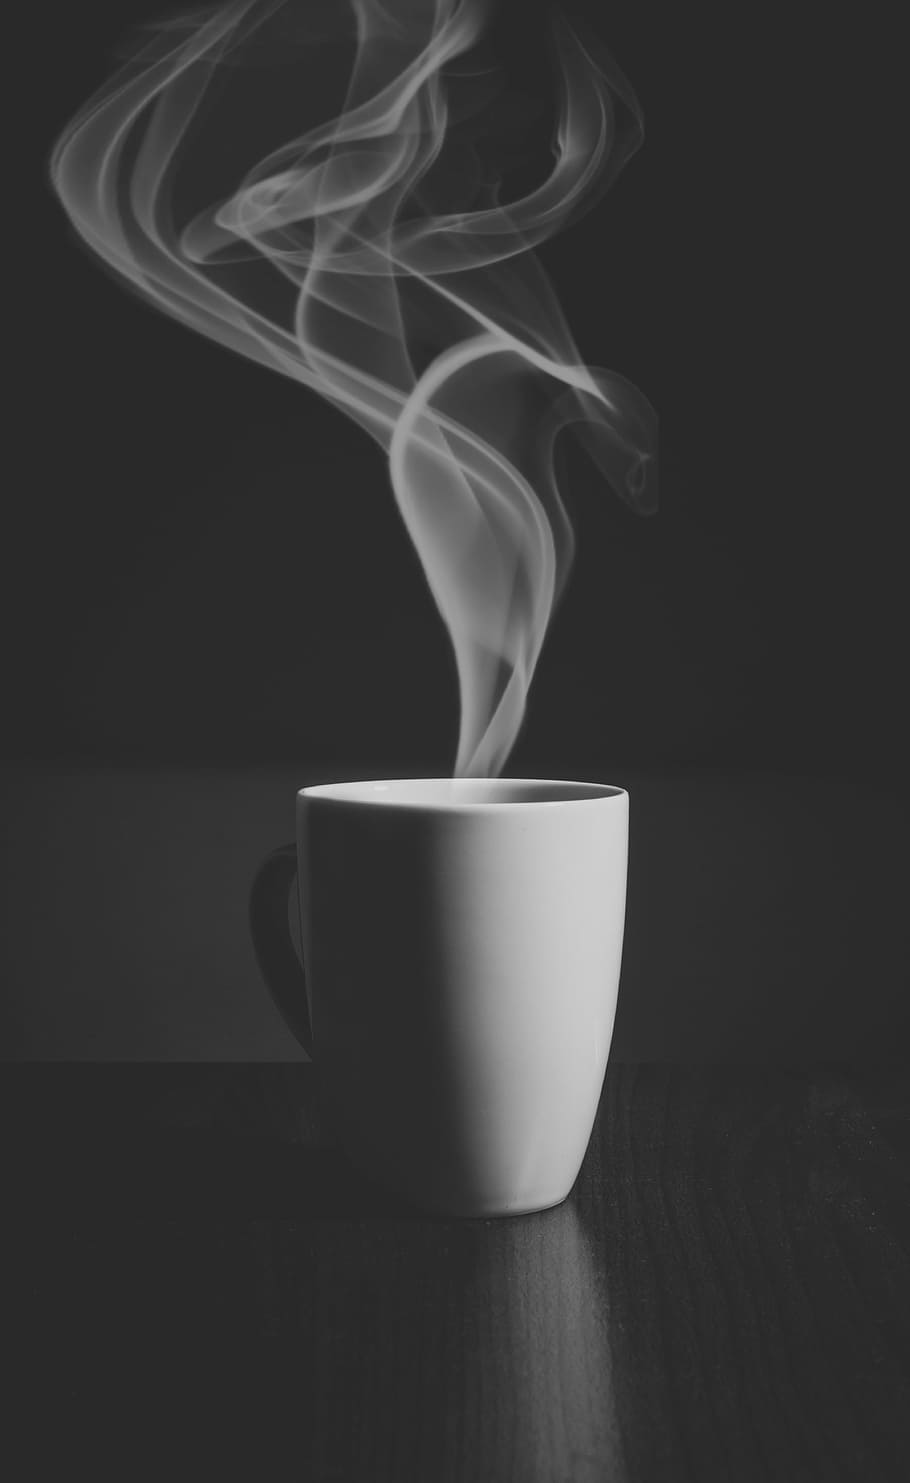 steam going out from mug grayscale photo, coffee, mocha, espresso, HD wallpaper